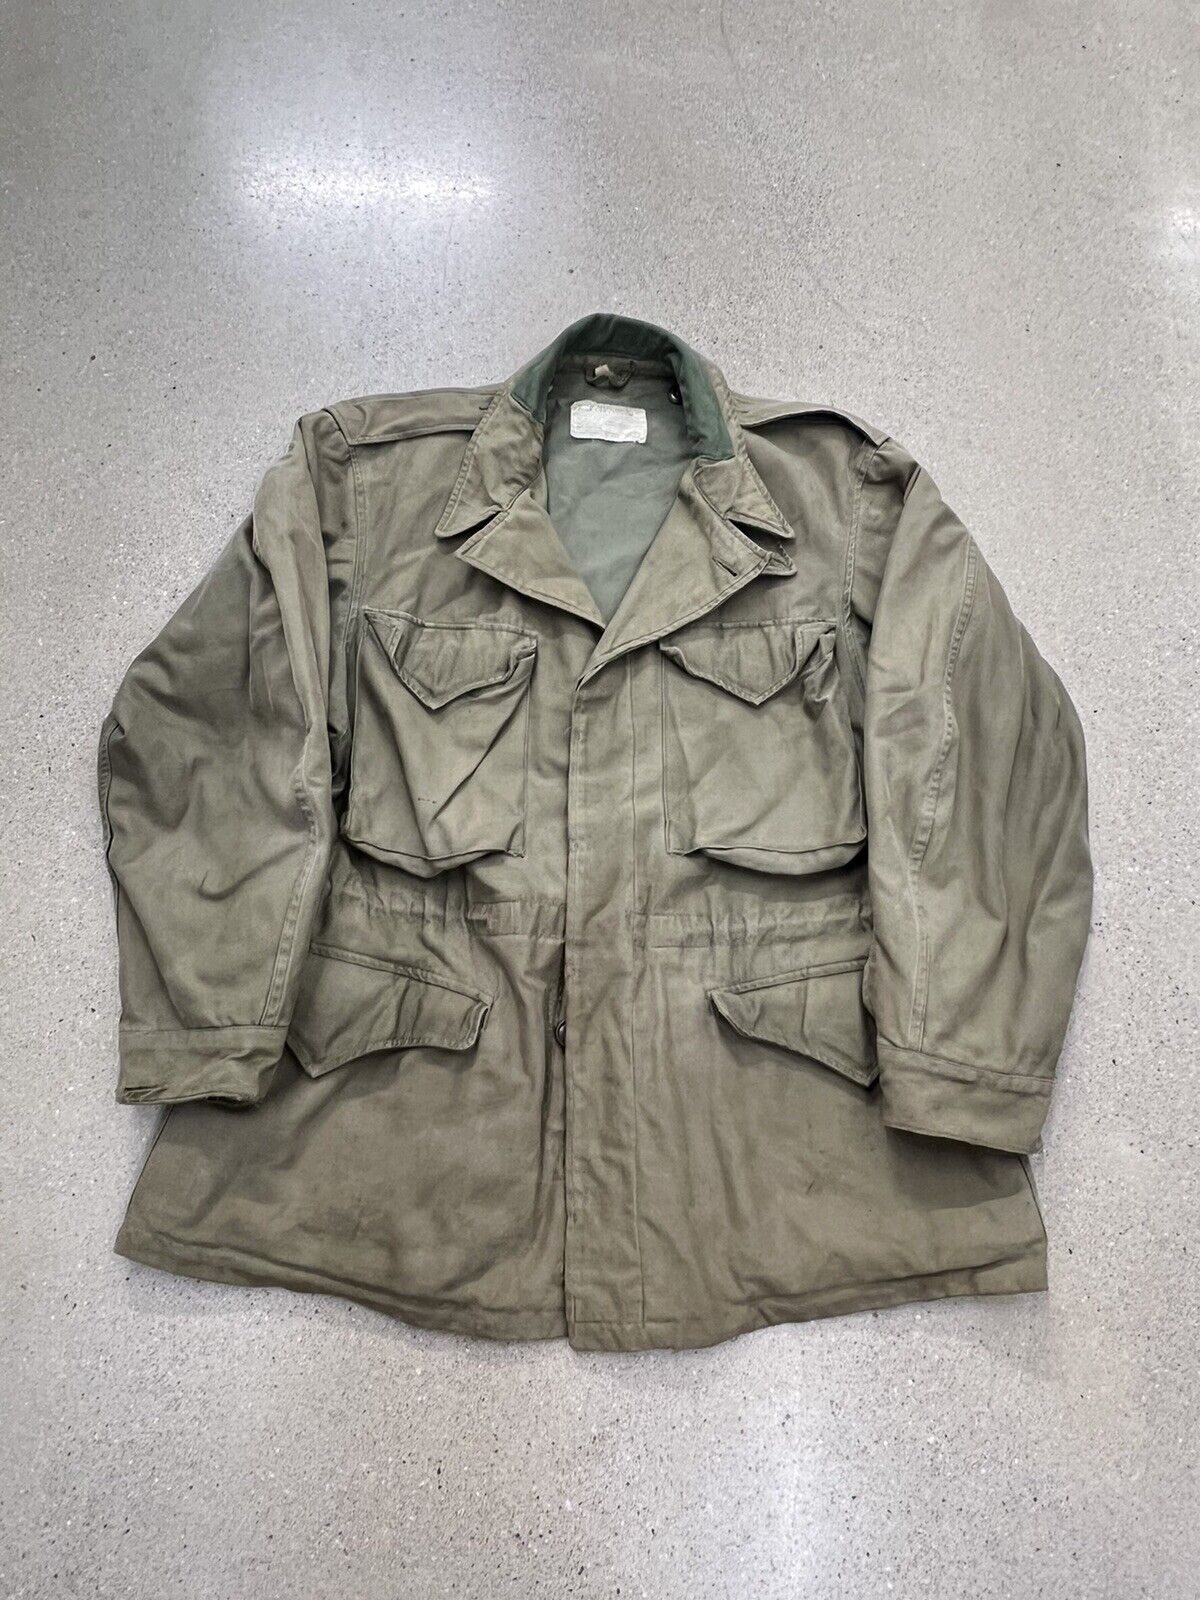 Vintage US Military Army M-1943 Field Jacket Size 38 Short WWII Era M-43